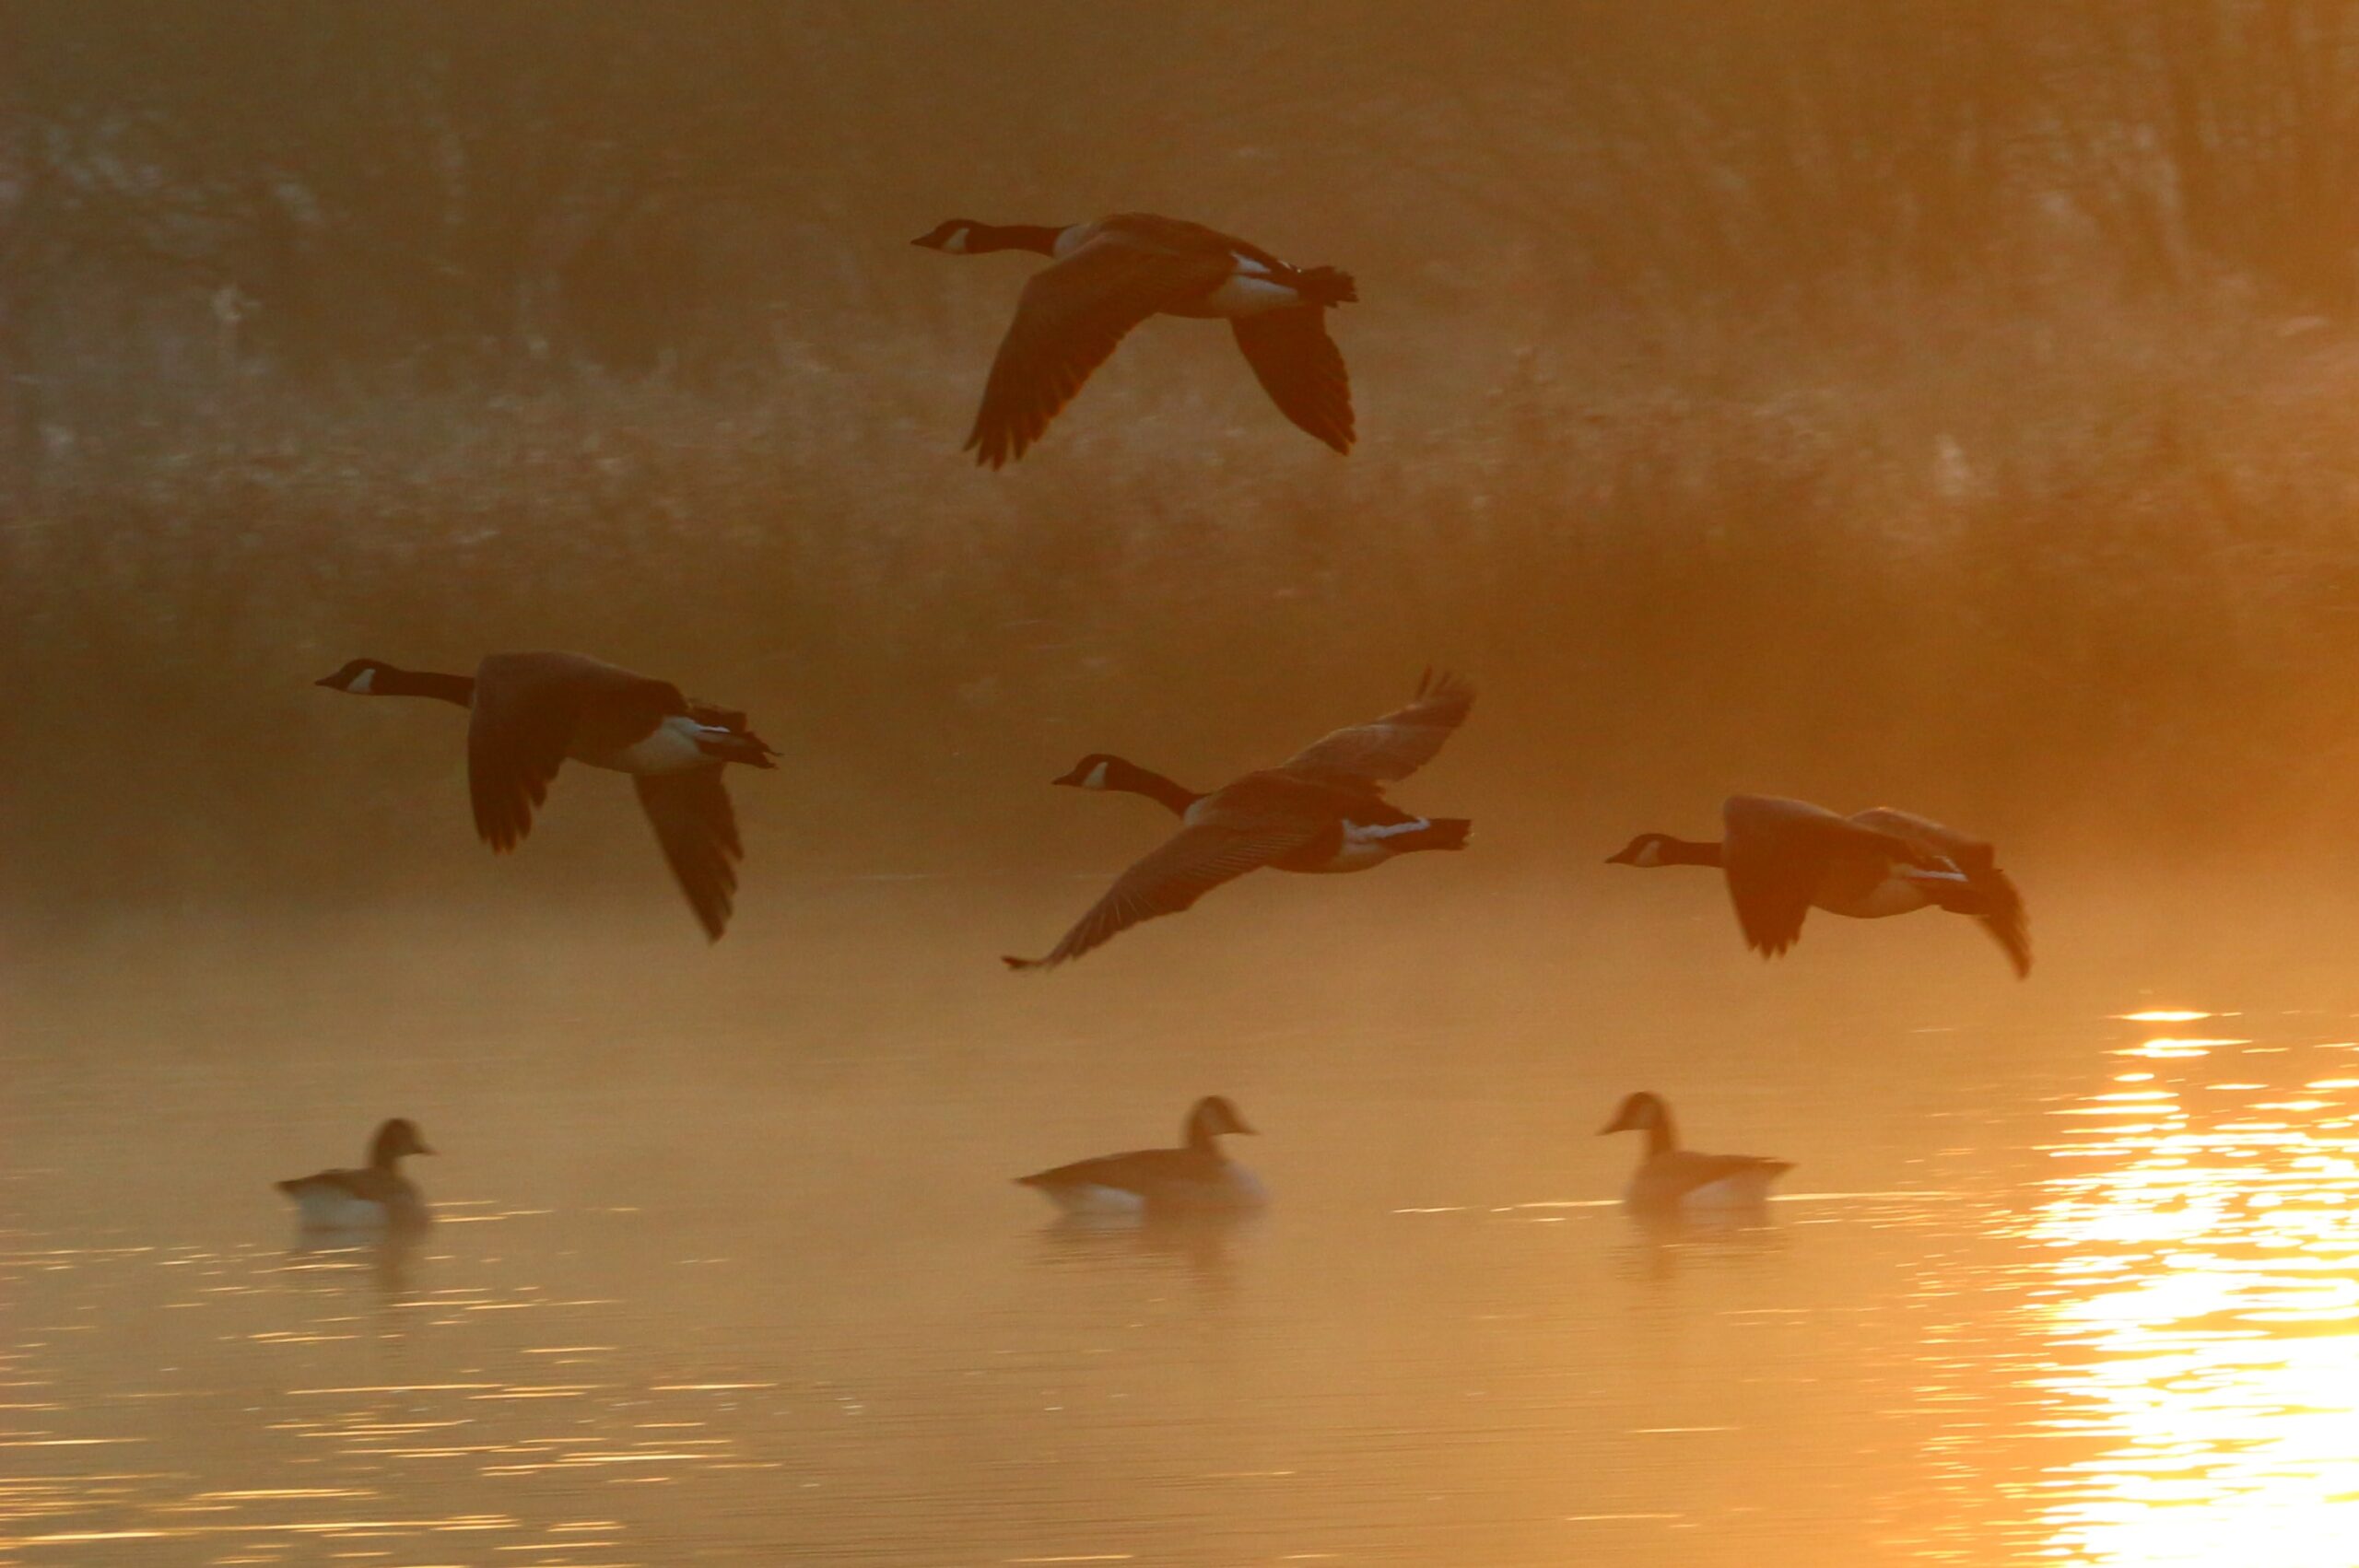 Wild Geese and Soft Mornings: A Poetry Analysis by Libby Kassuelke